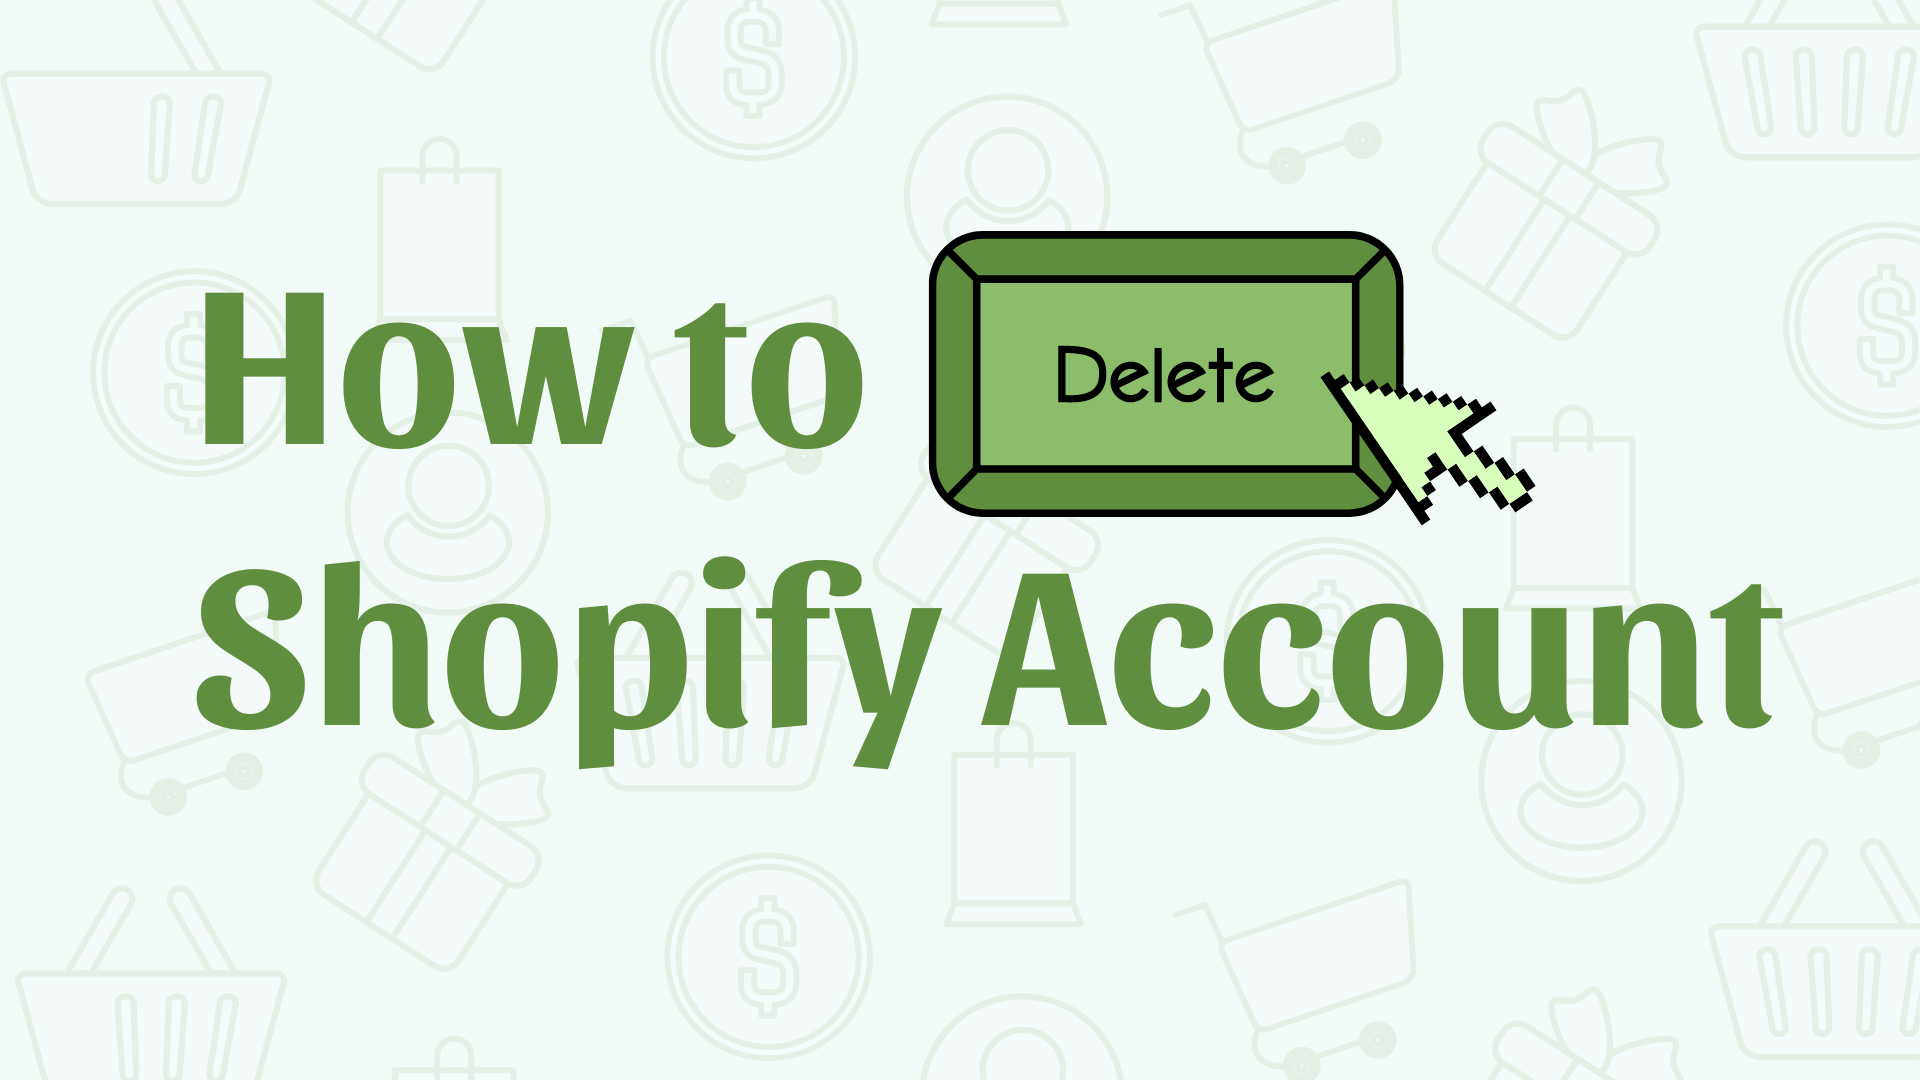 How to delete shopify account